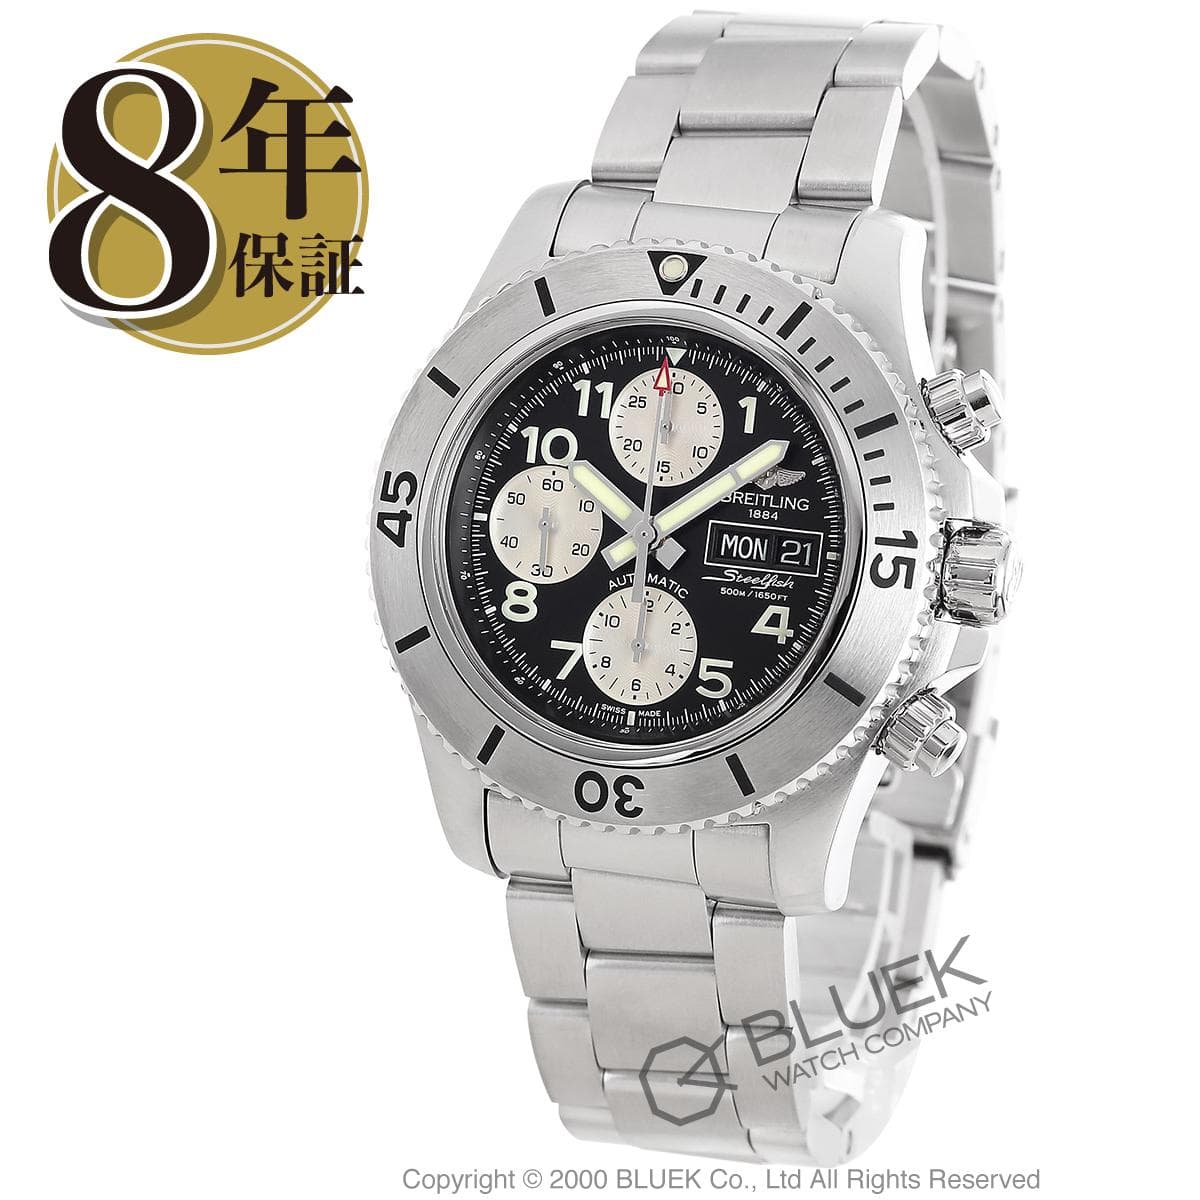 New]BREITLING Super Ocean Steel Fish Chronograph 500m waterproof  A141B19PSS_8 - BE FORWARD Store